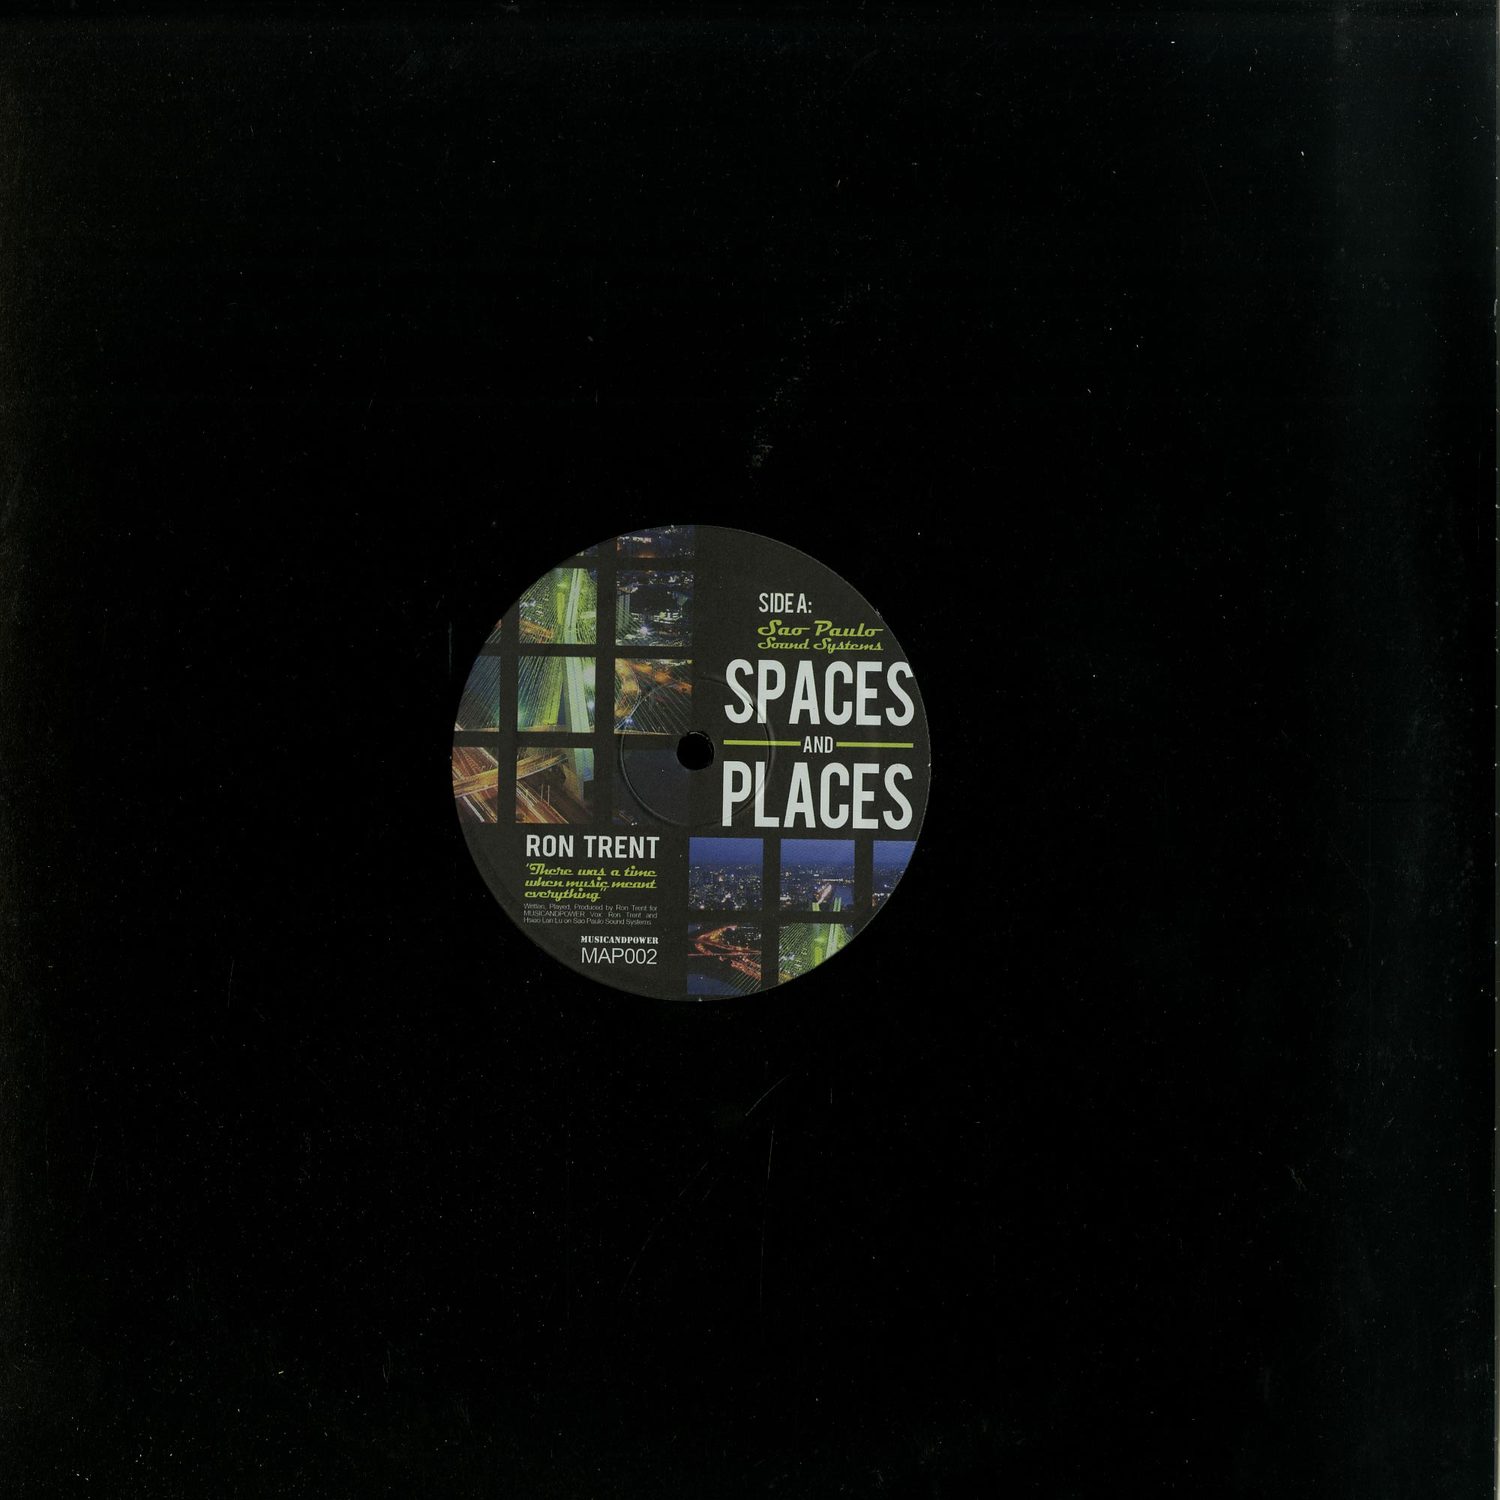 Ron Trent - SPACES AND PLACES PT. 2